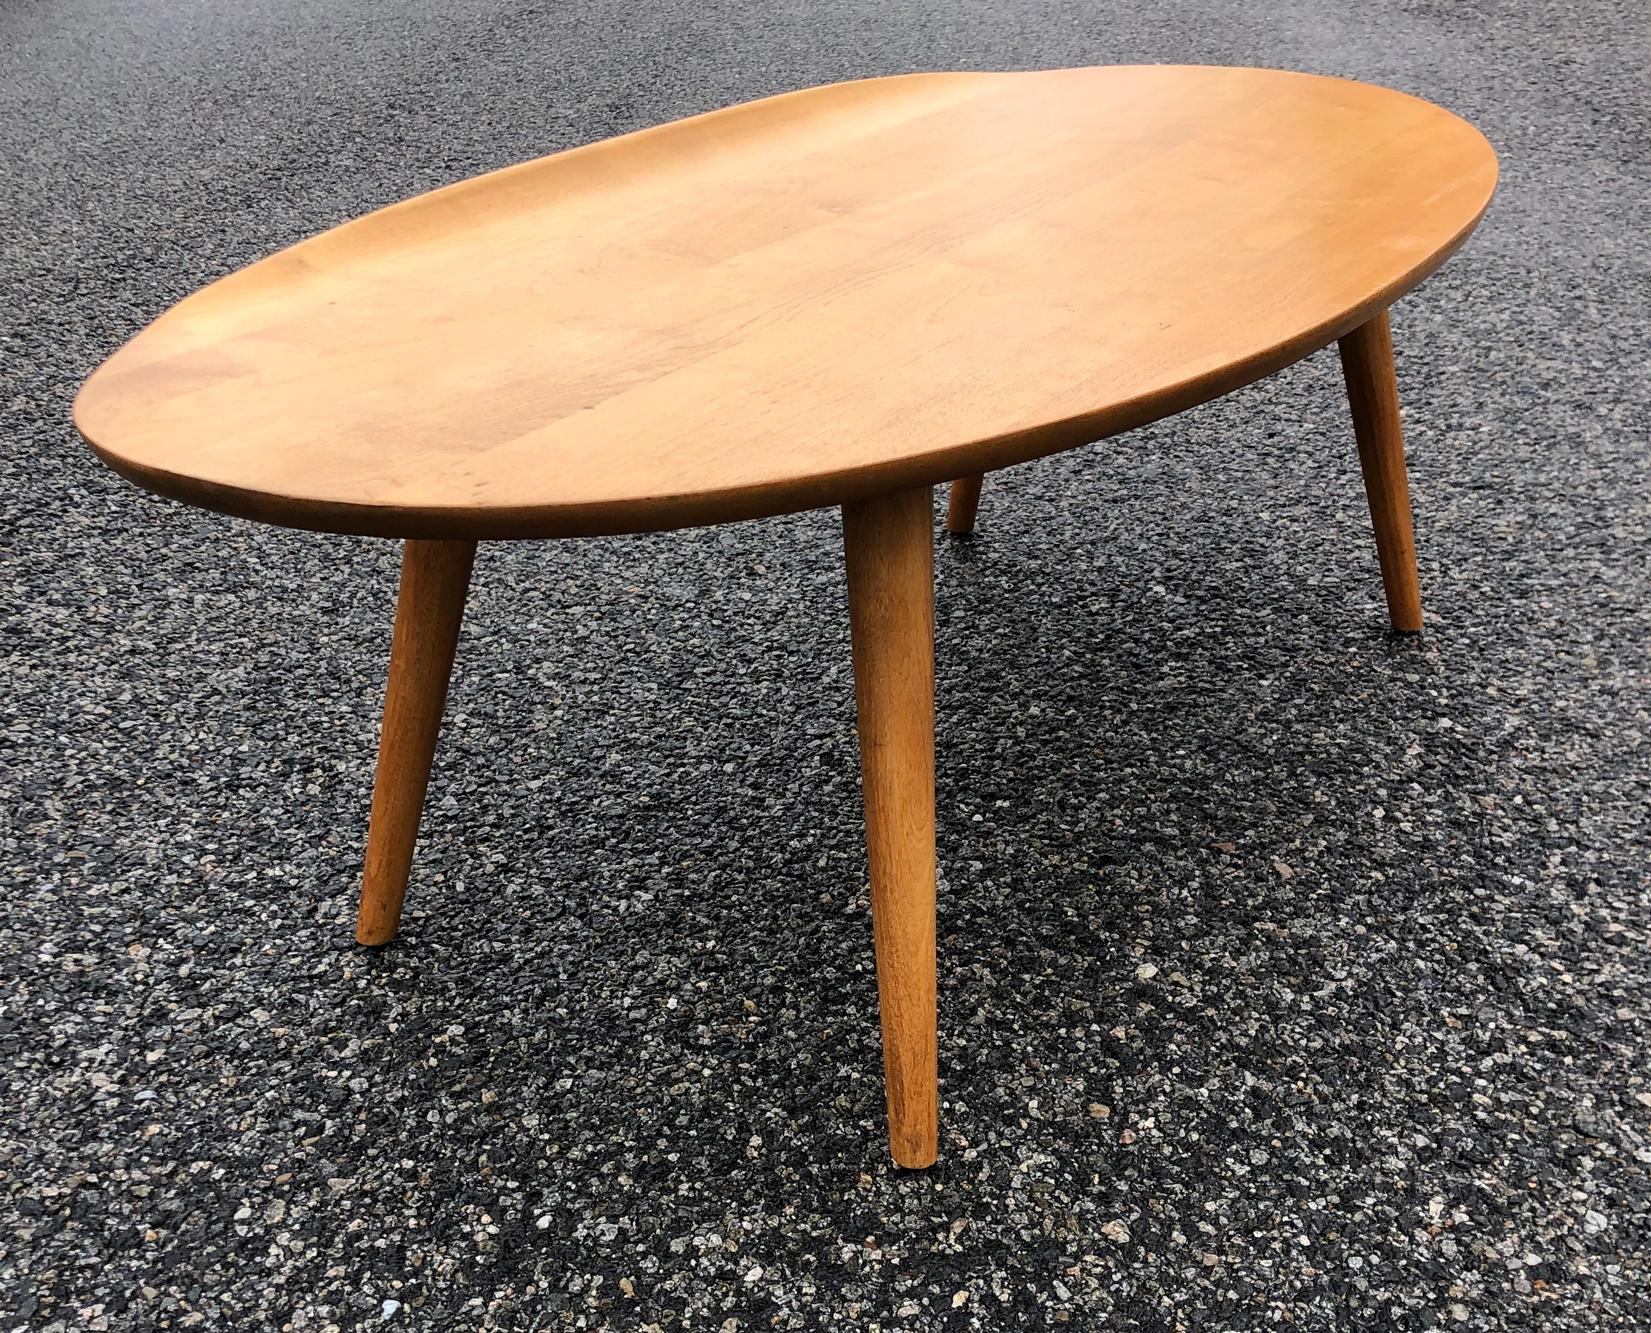 A wonderful and play on the surfboard. Oval shaped coffee table with a raised edge. Made from solid maple. Designed by the famous architect Russel Wright. In original condition A cool addition to any home.